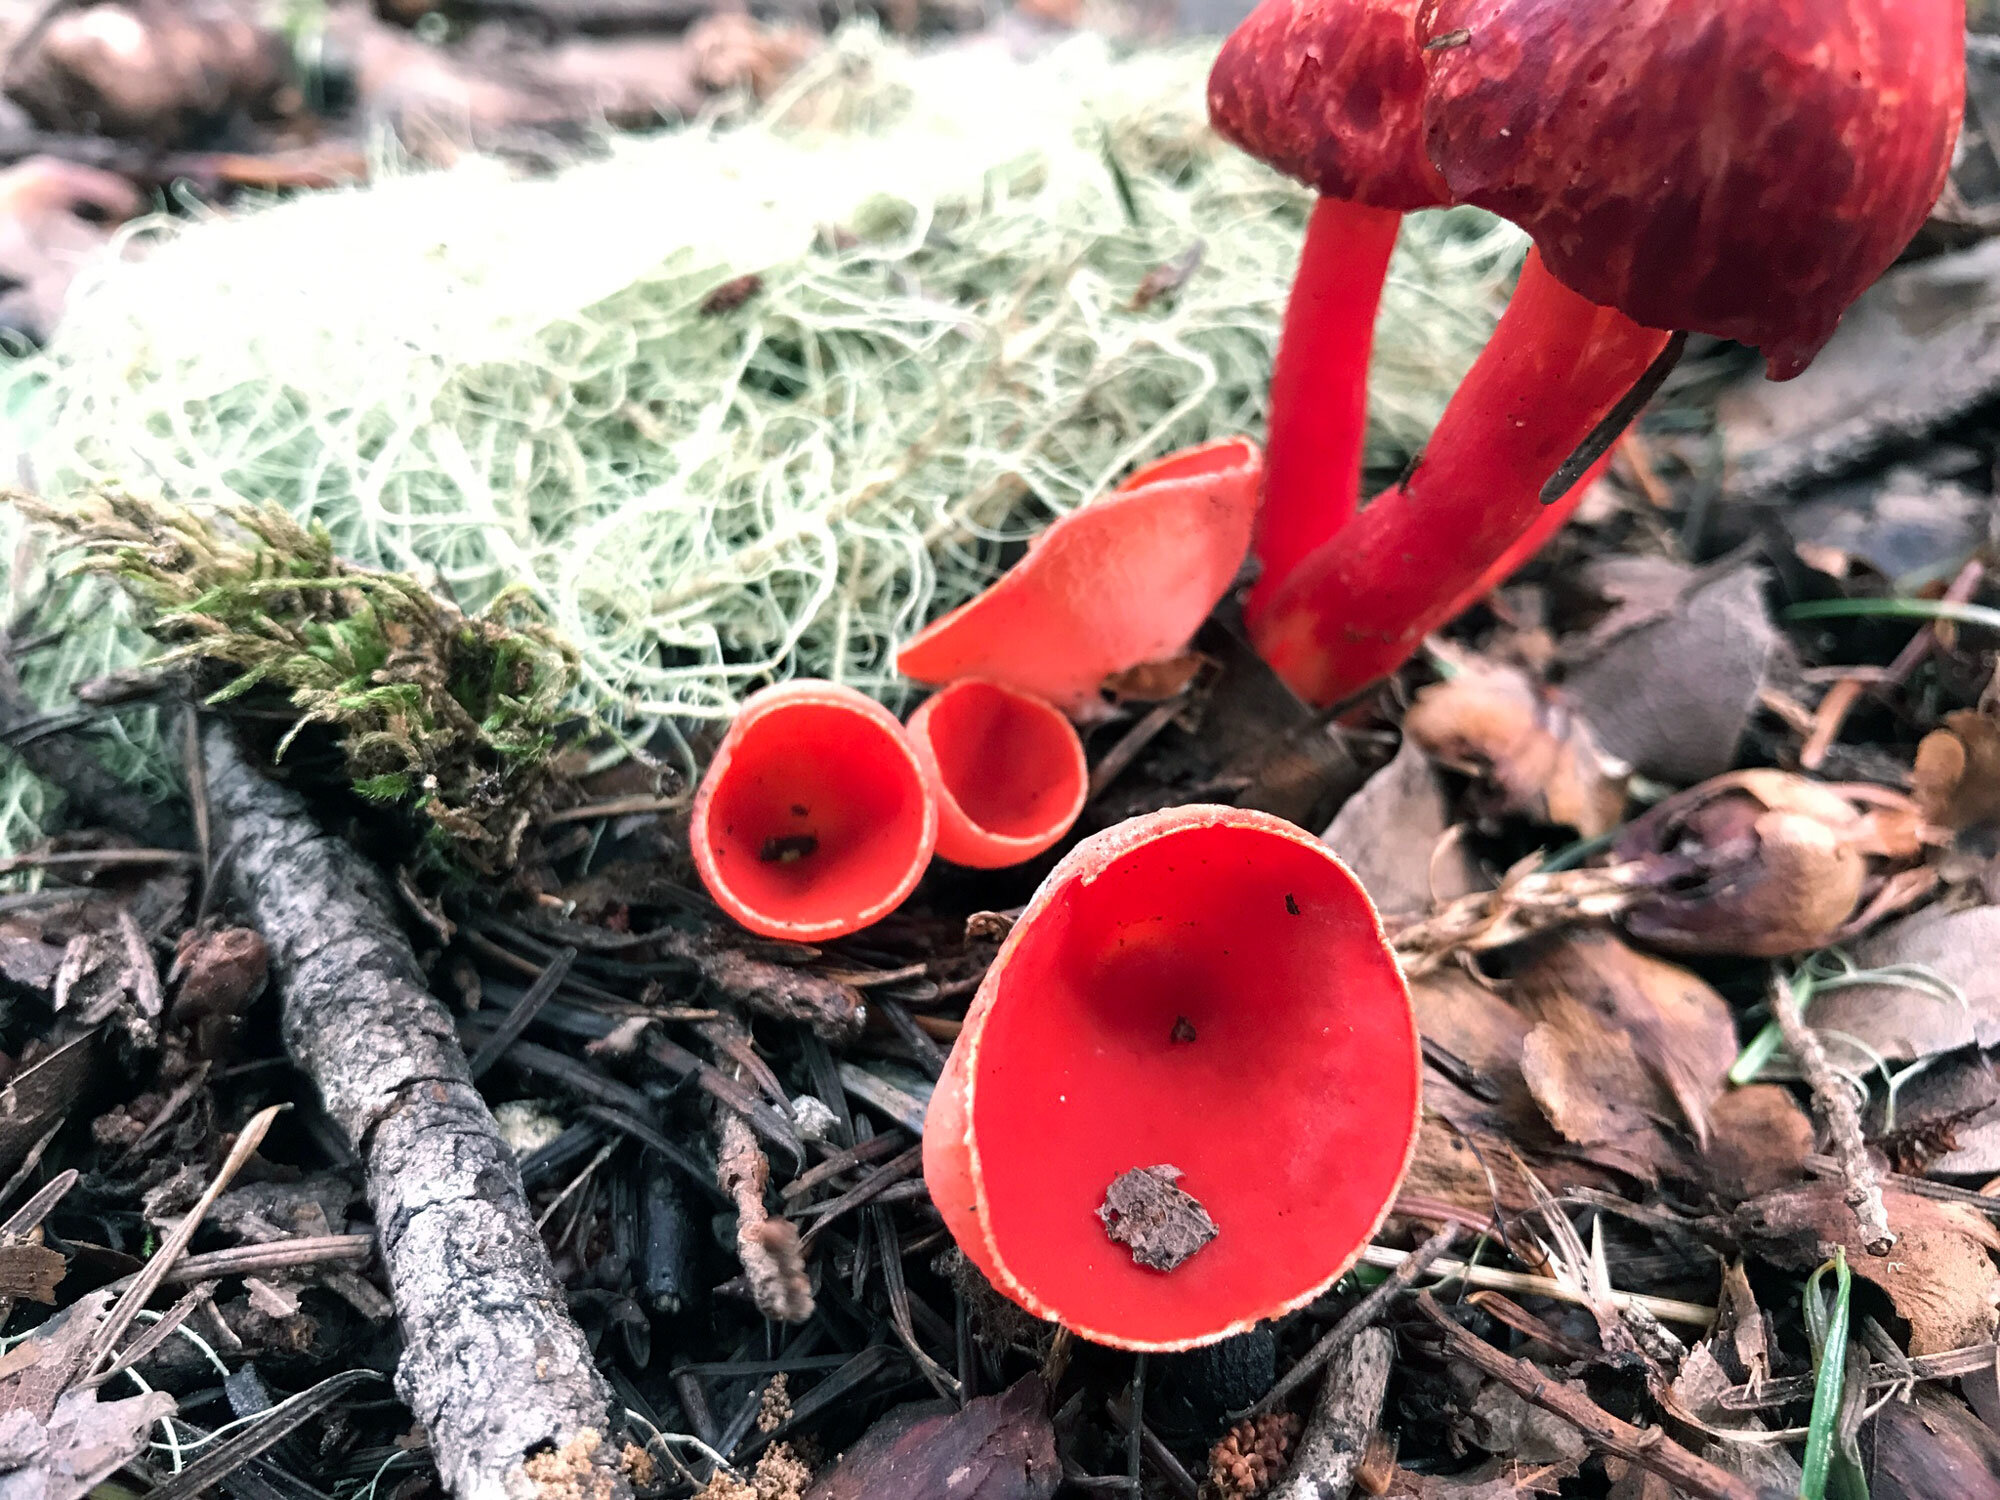 Scarlet Cup (Sarcoscypha coccinea) and Scarlet Waxy Cap (Hygrocybe coccinea)